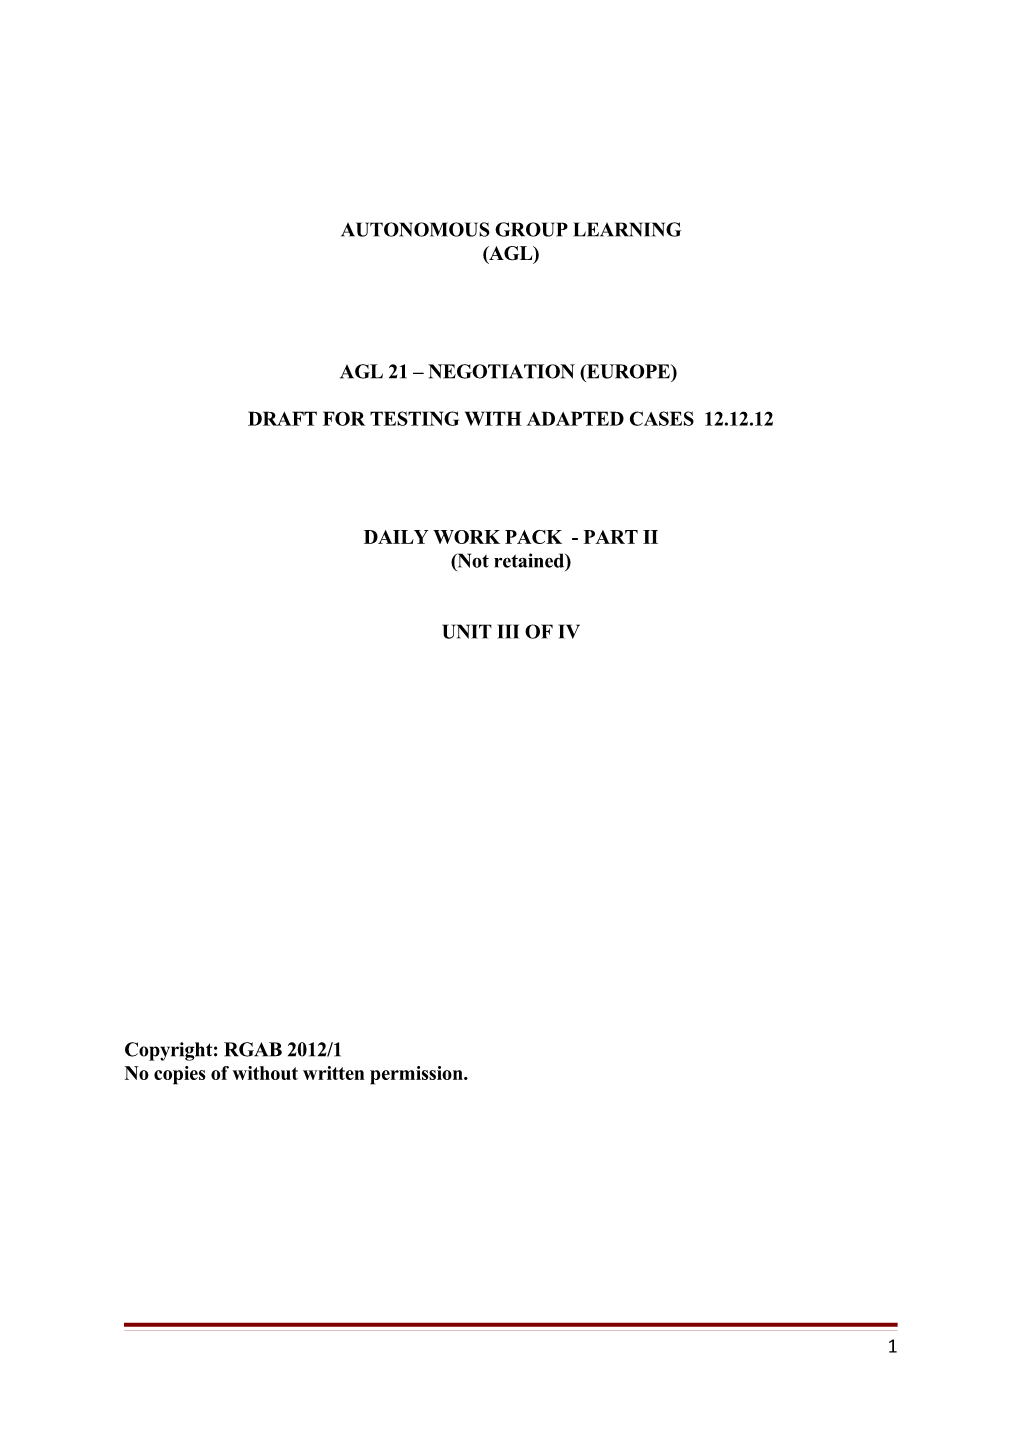 Draft for Testingwith Adapted Cases 12.12.12